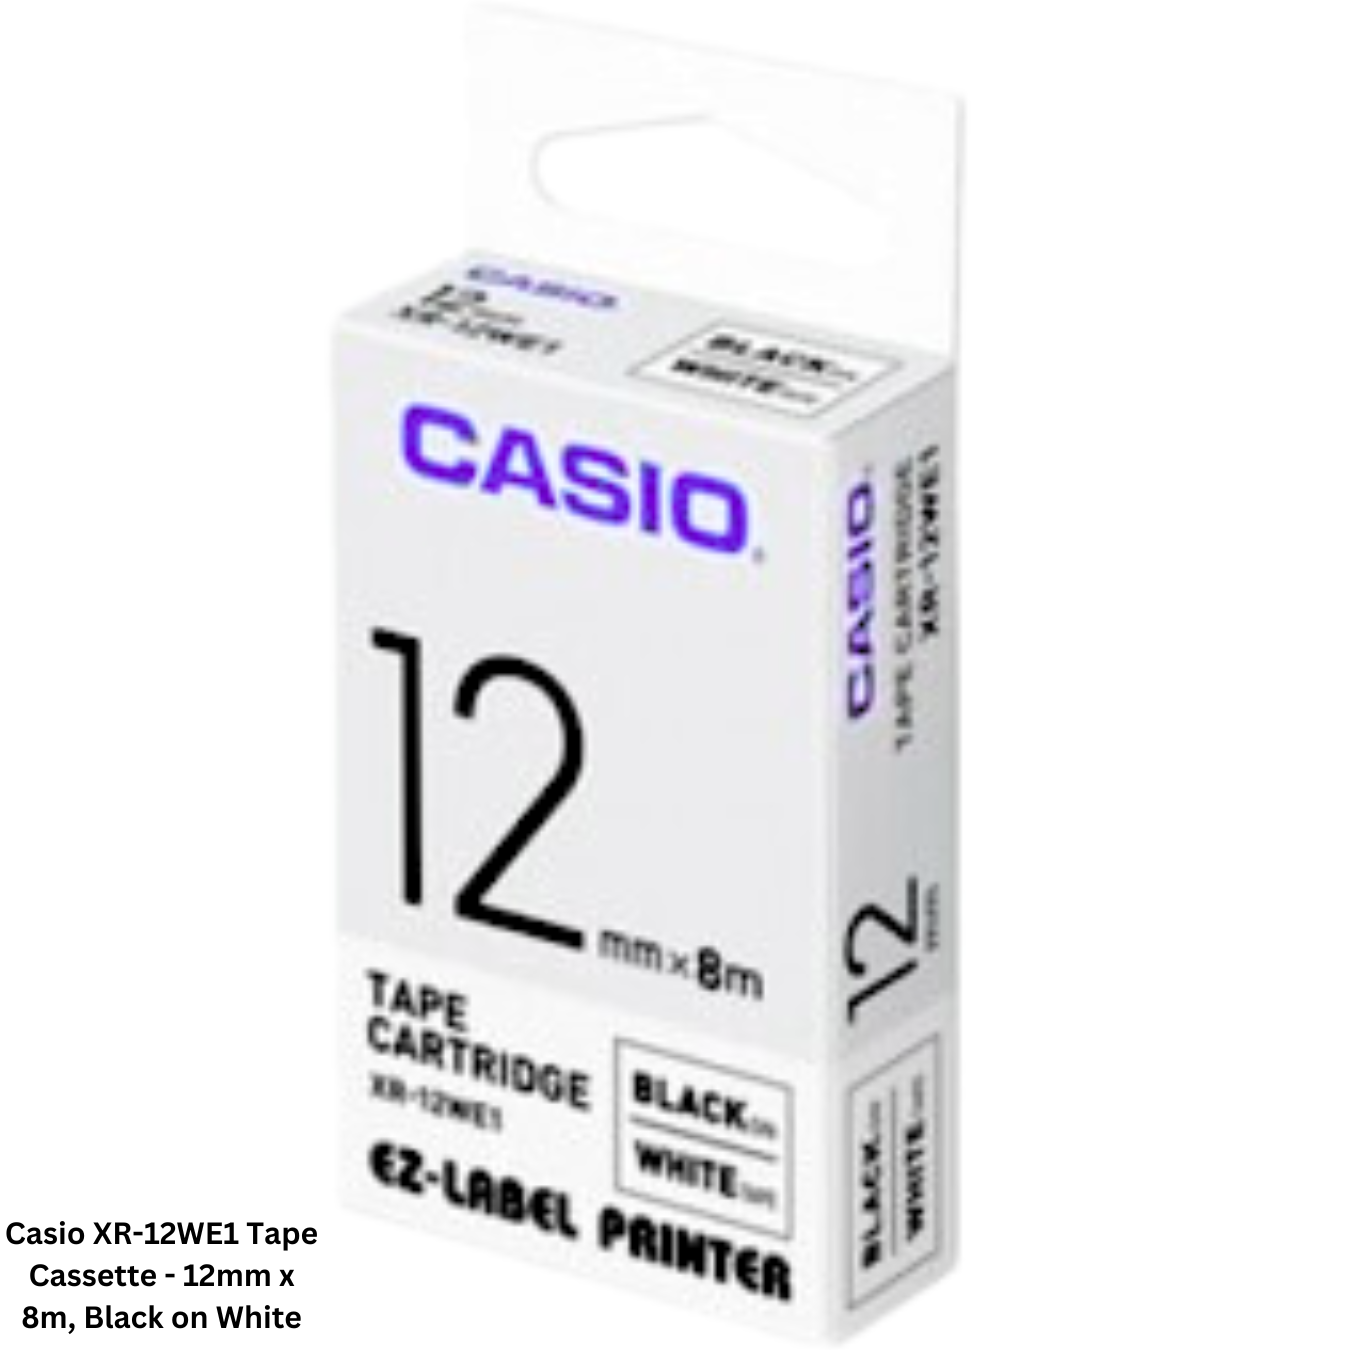 Casio XR-12WE1 Tape Cassette, 12mm x 8m, Black on White. This tape cassette by Casio is designed for use in label printers, offering clear and durable labeling for various applications